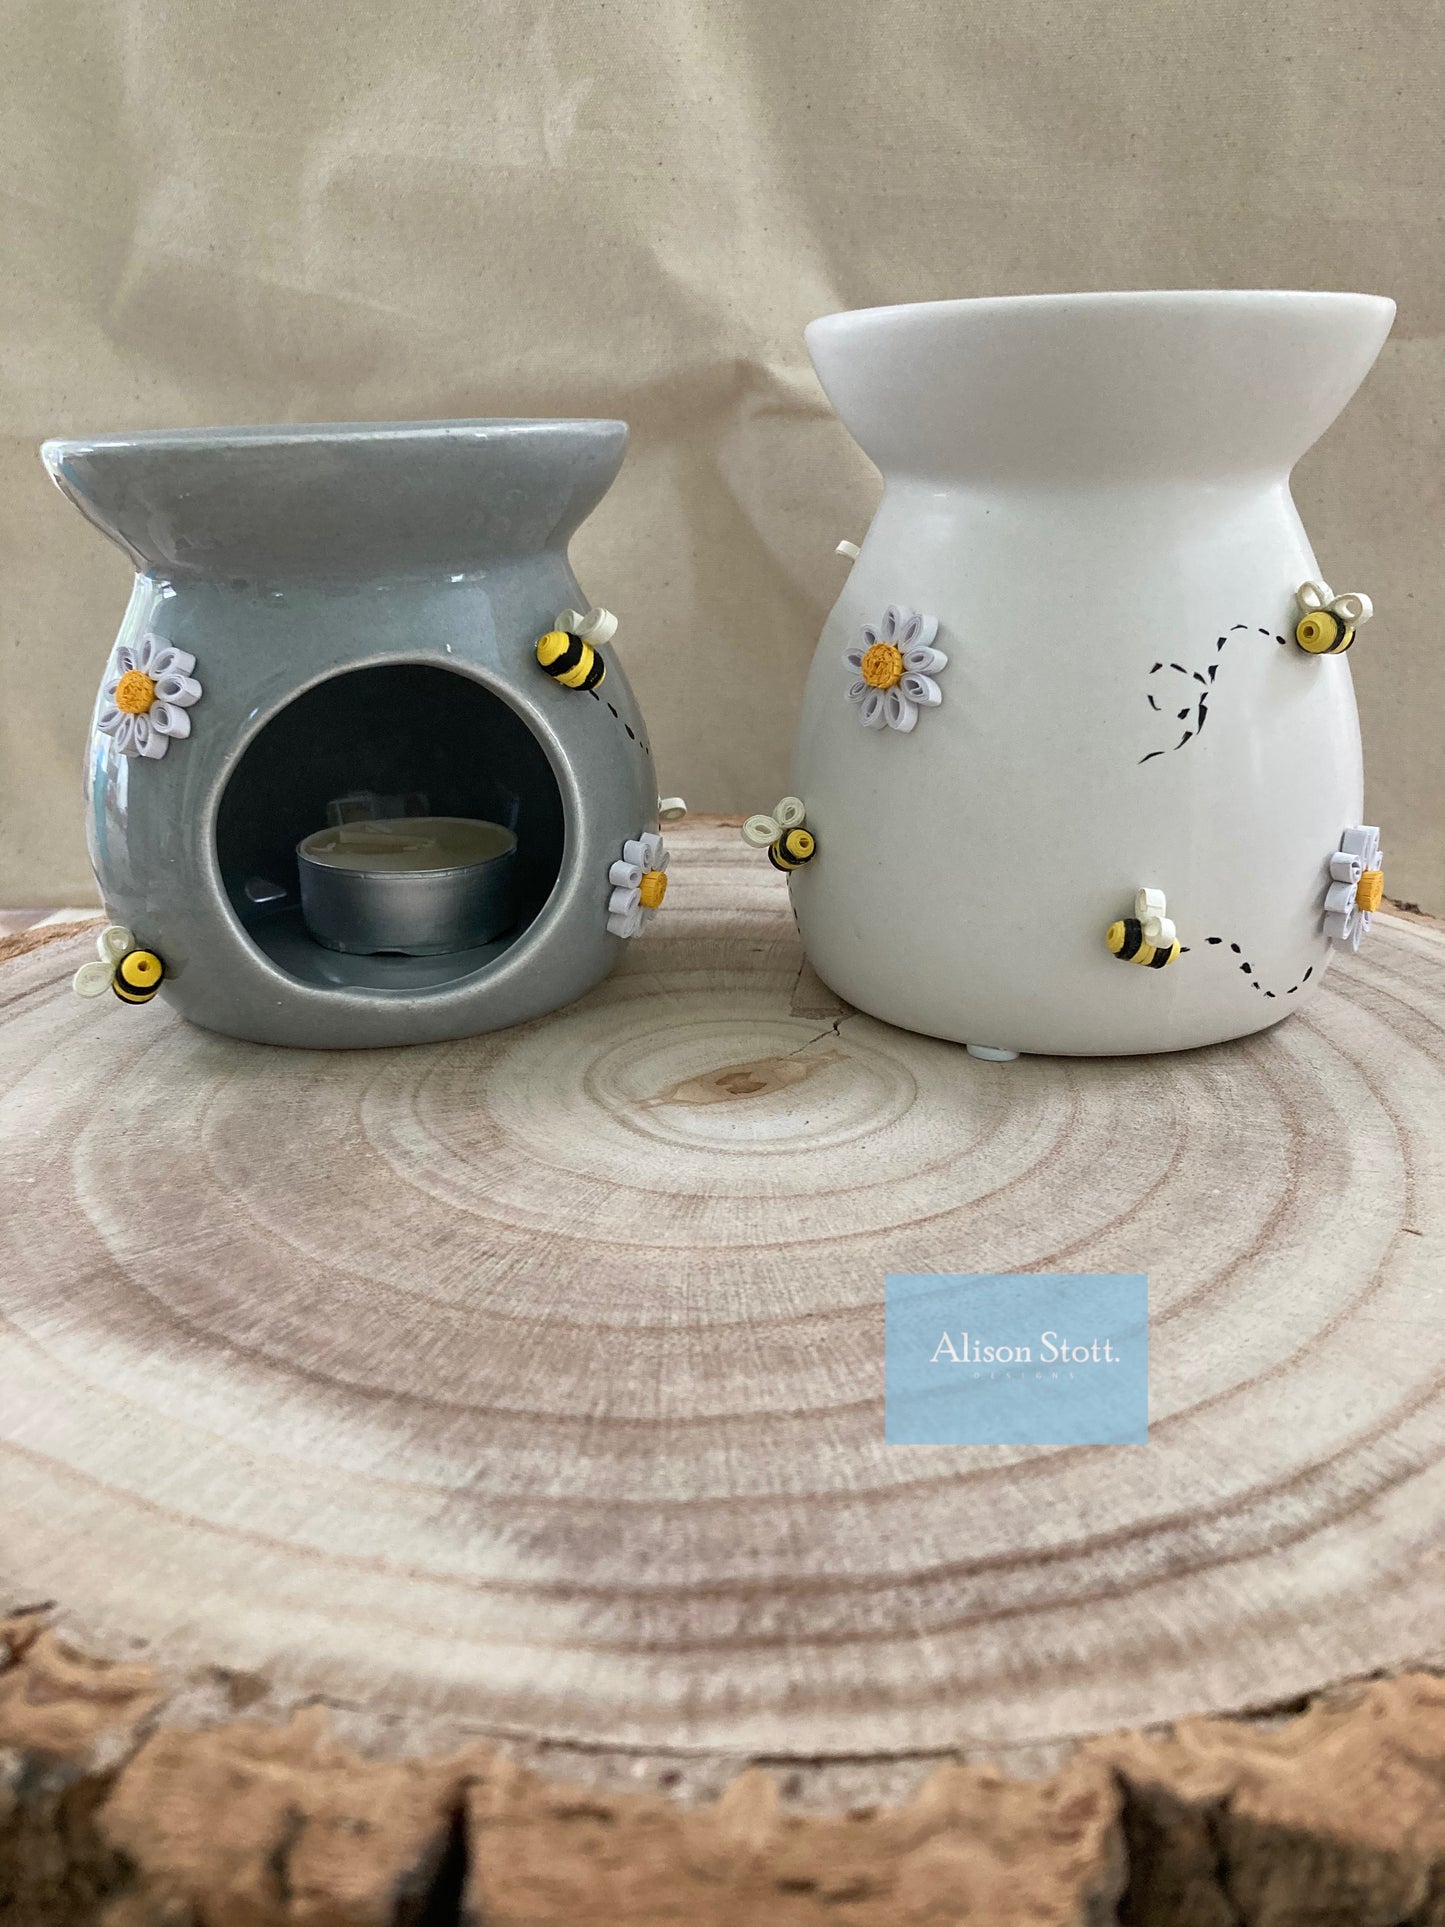 On offer was £9 now £8 Bee and daisy wax burner